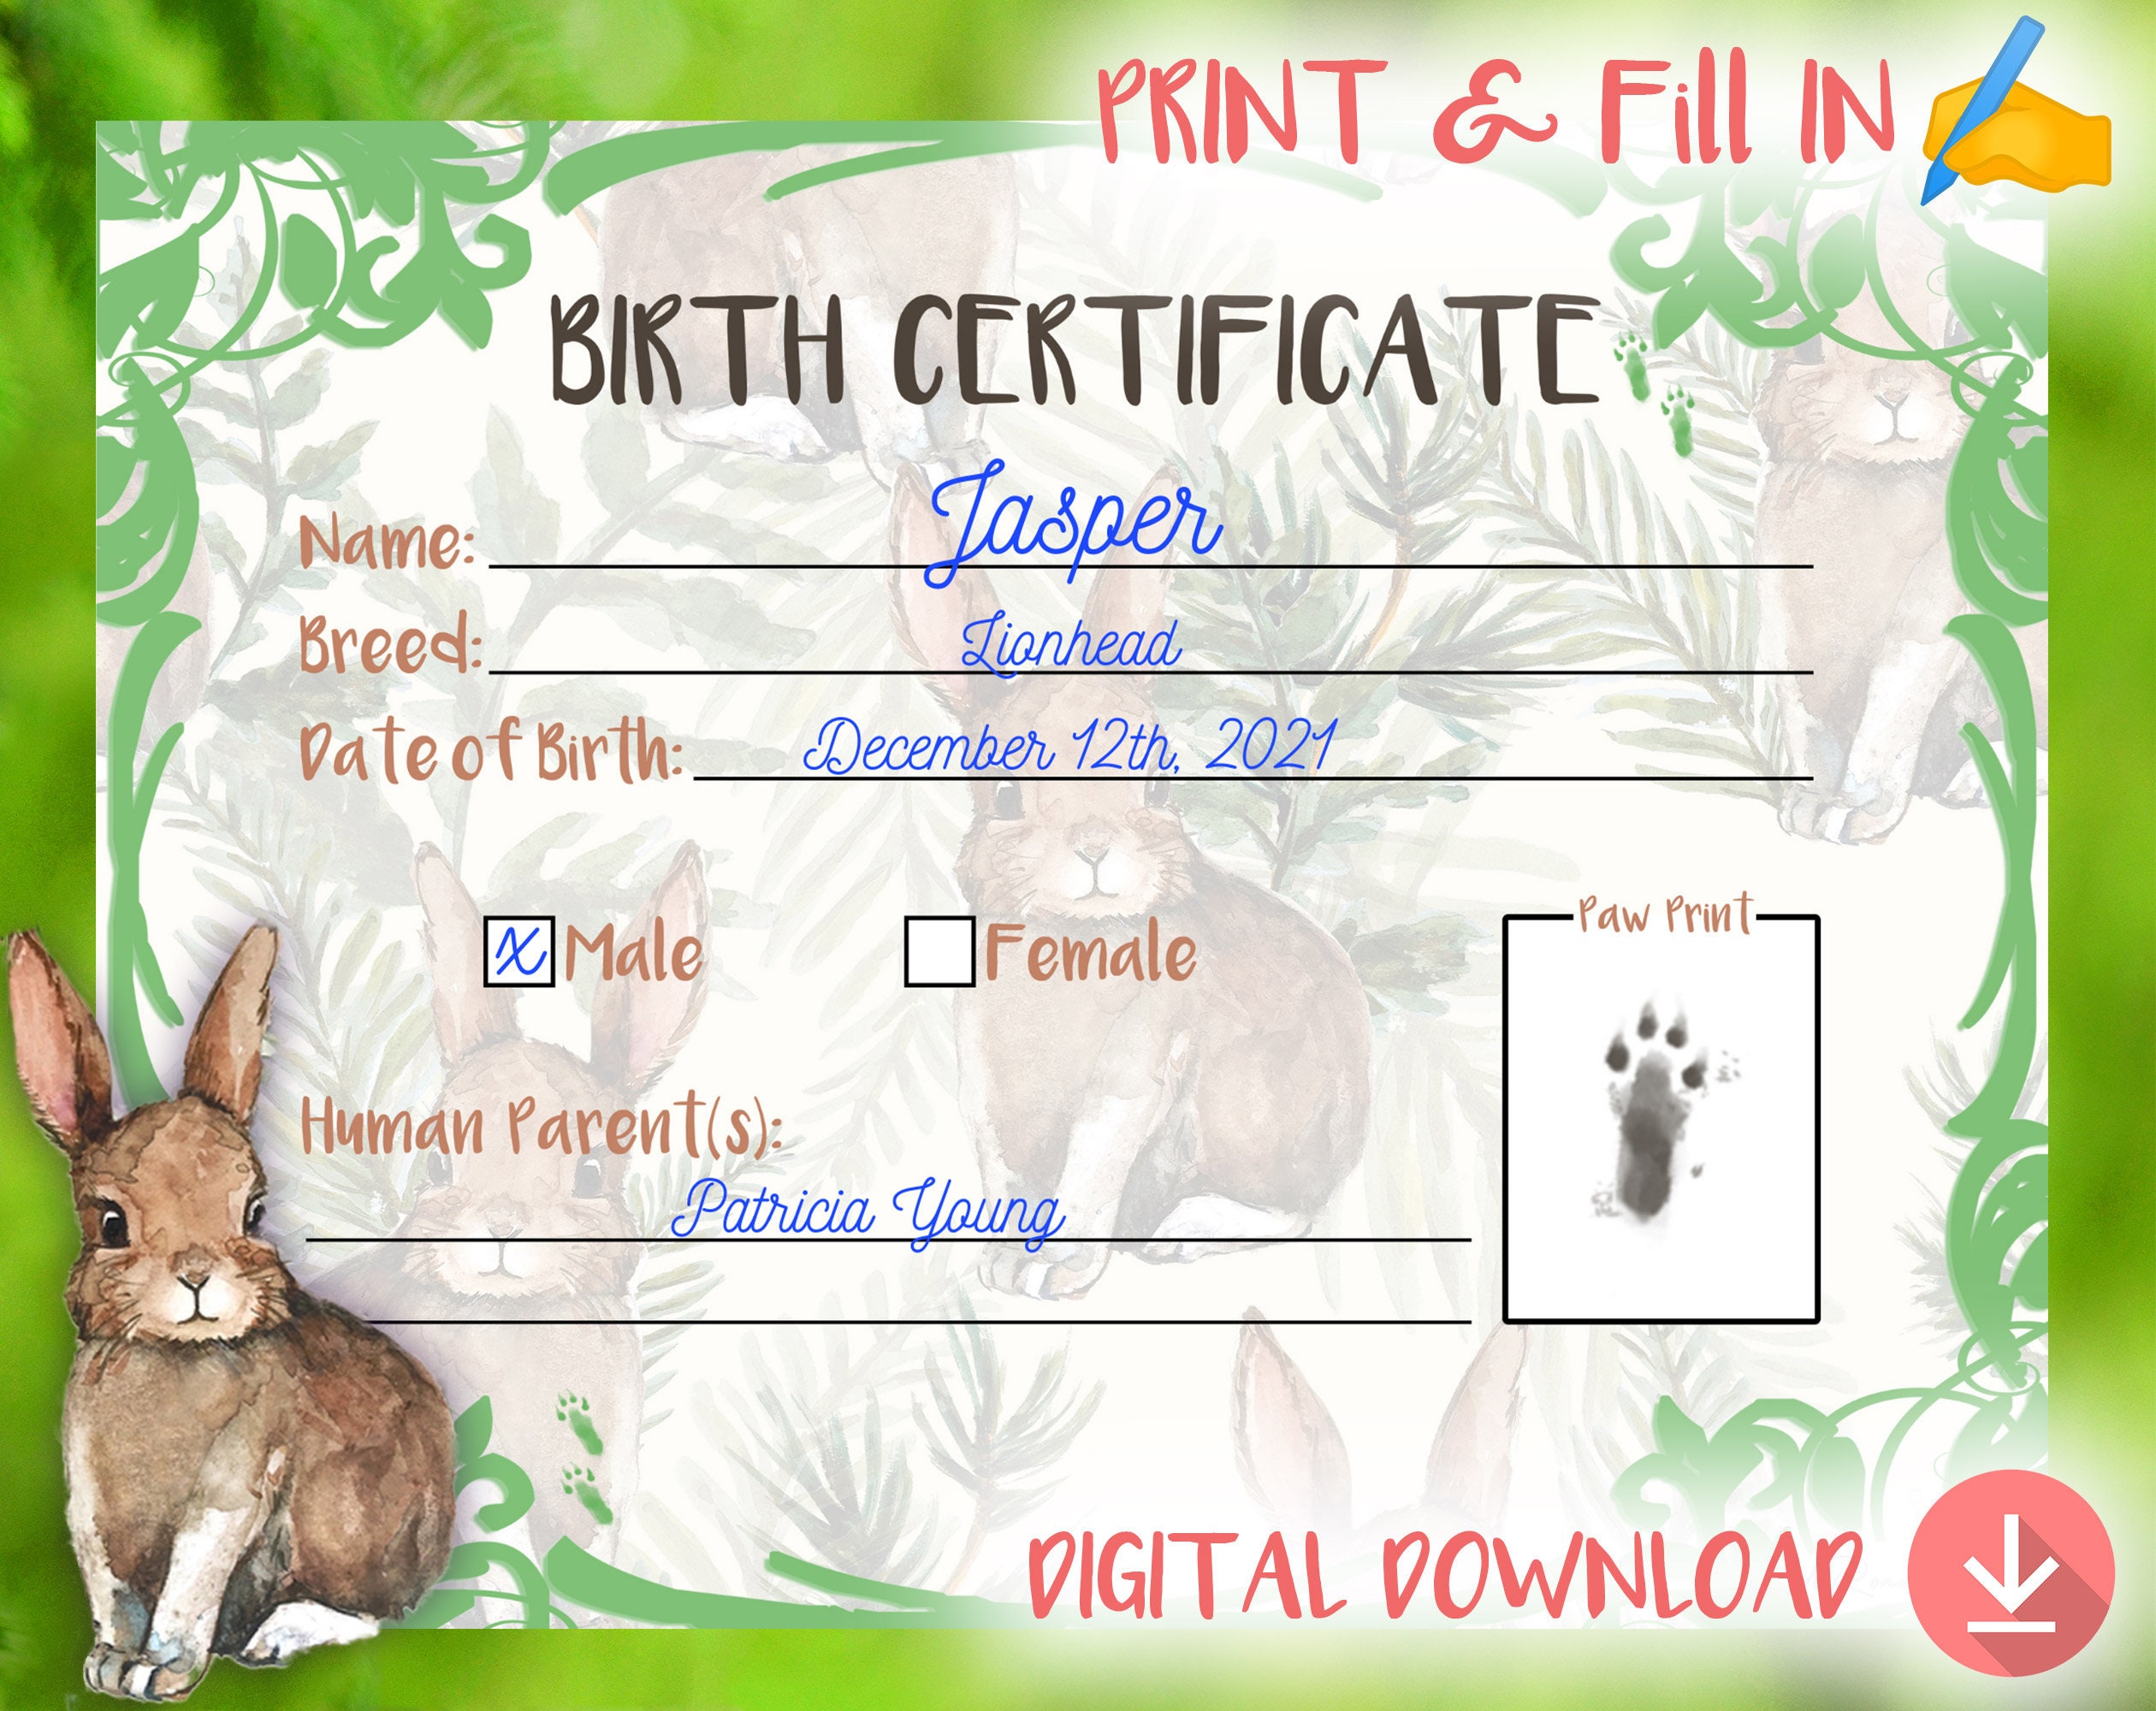 bunny-birth-certificate-printable-print-and-fill-in-adopt-etsy